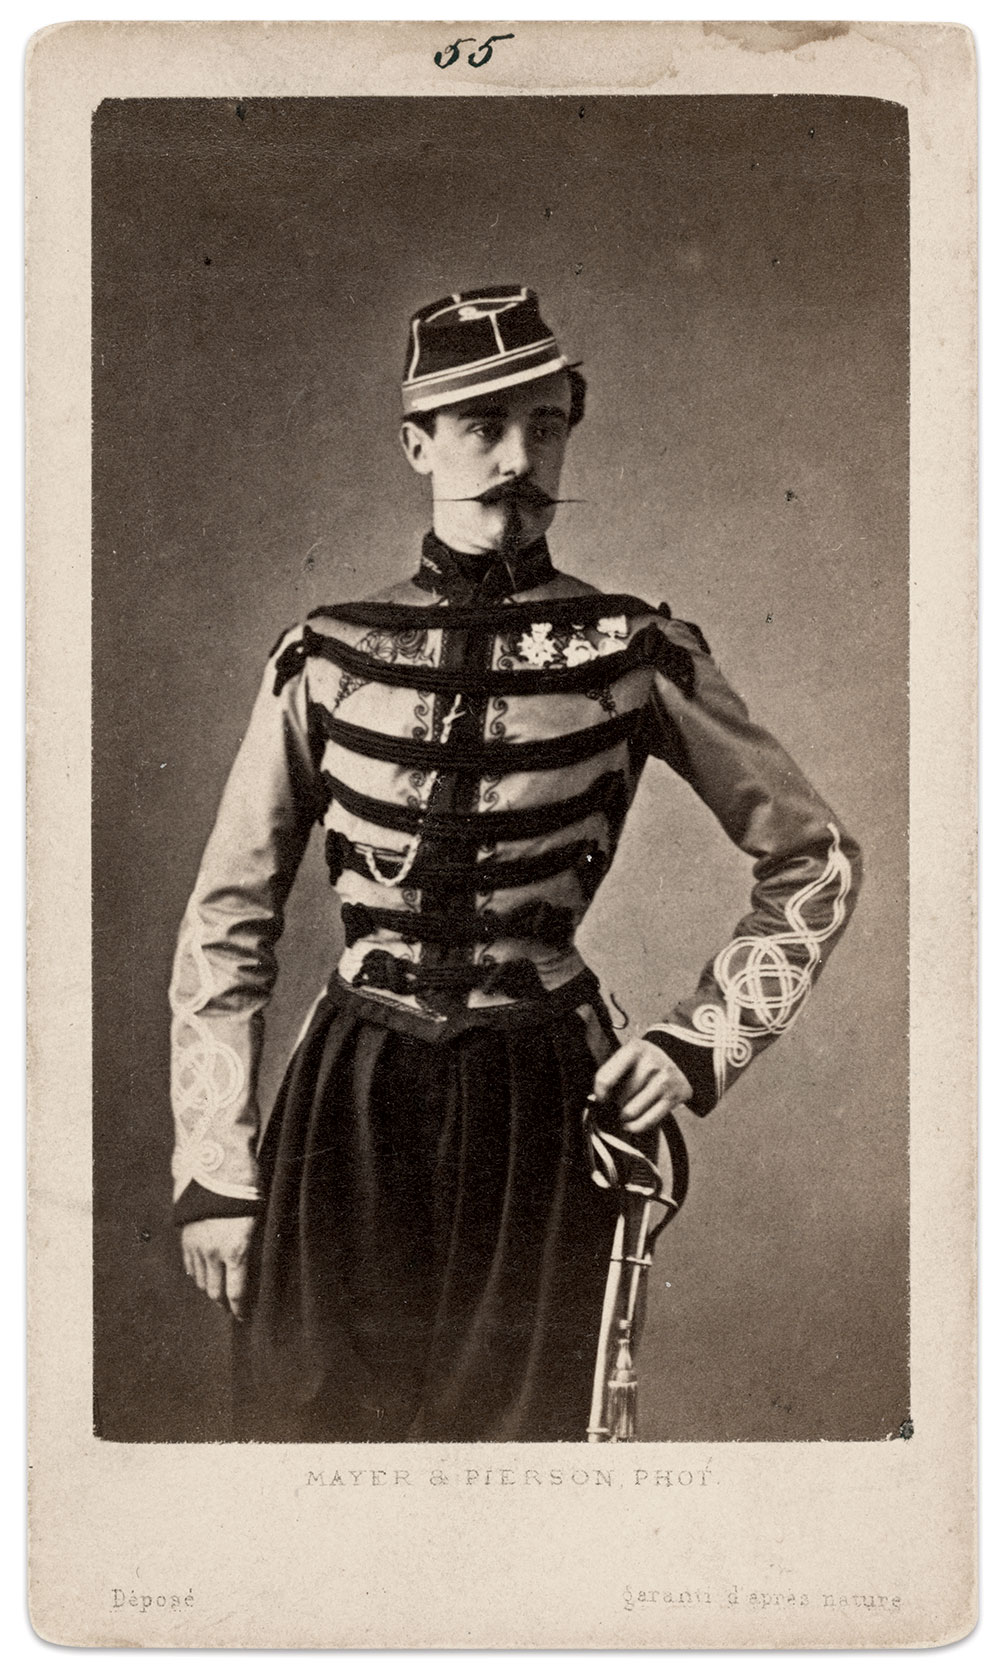 Influential friend in a high place: Jerome Napoleon Bonaparte II (1830-1923), West Point Class of 1852, proved a useful ally to Huse during his time in Europe. Carte de visite by Mayer & Pierson of Paris, France.